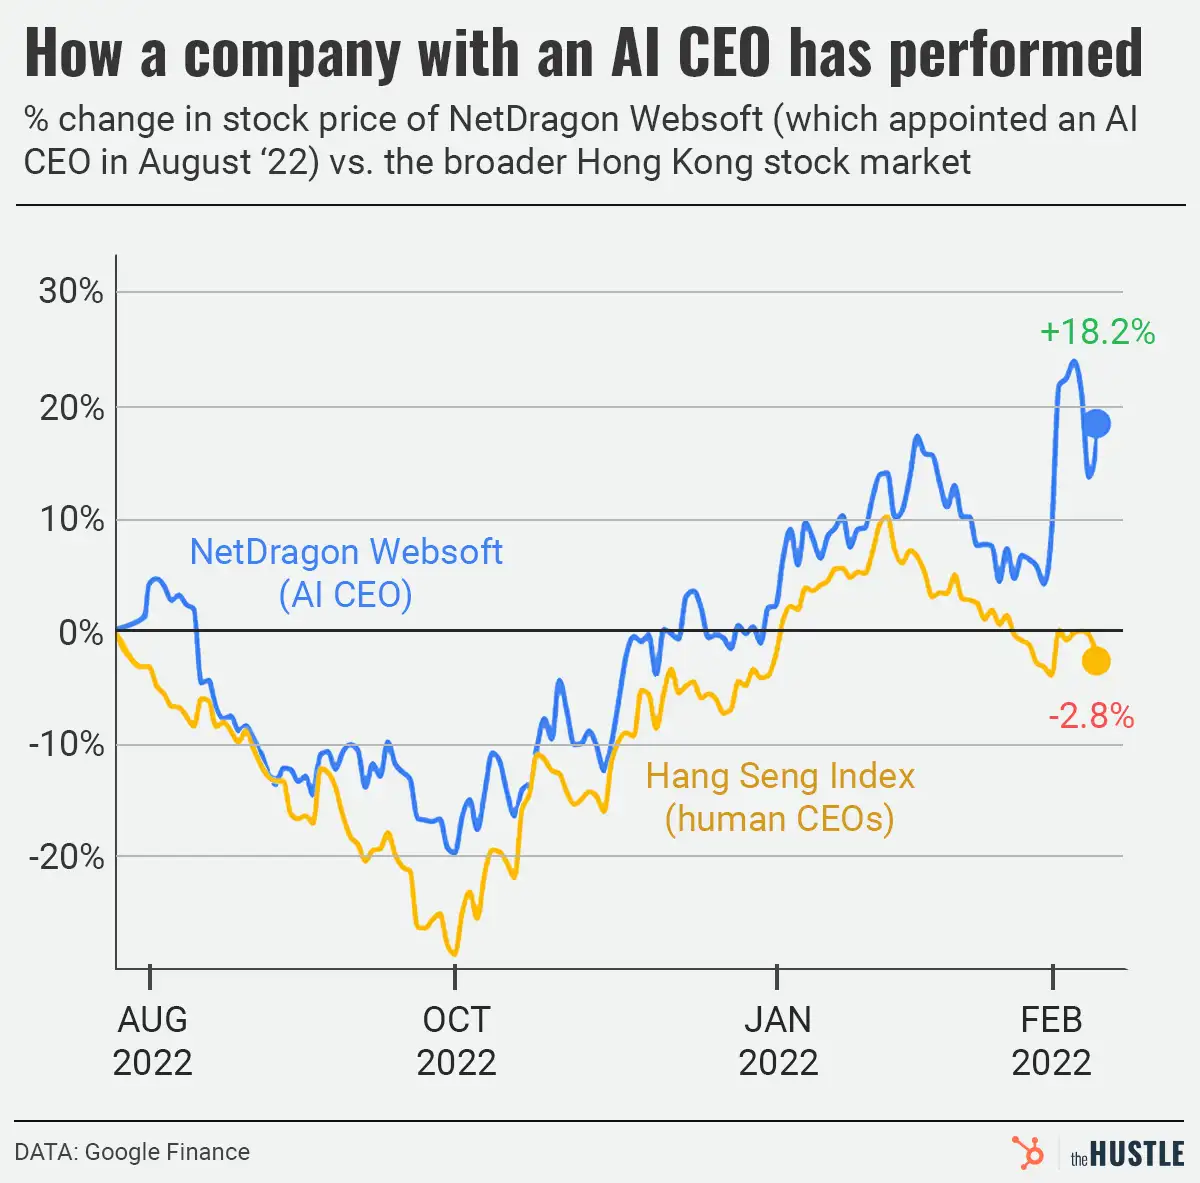 Should we automate the CEO?